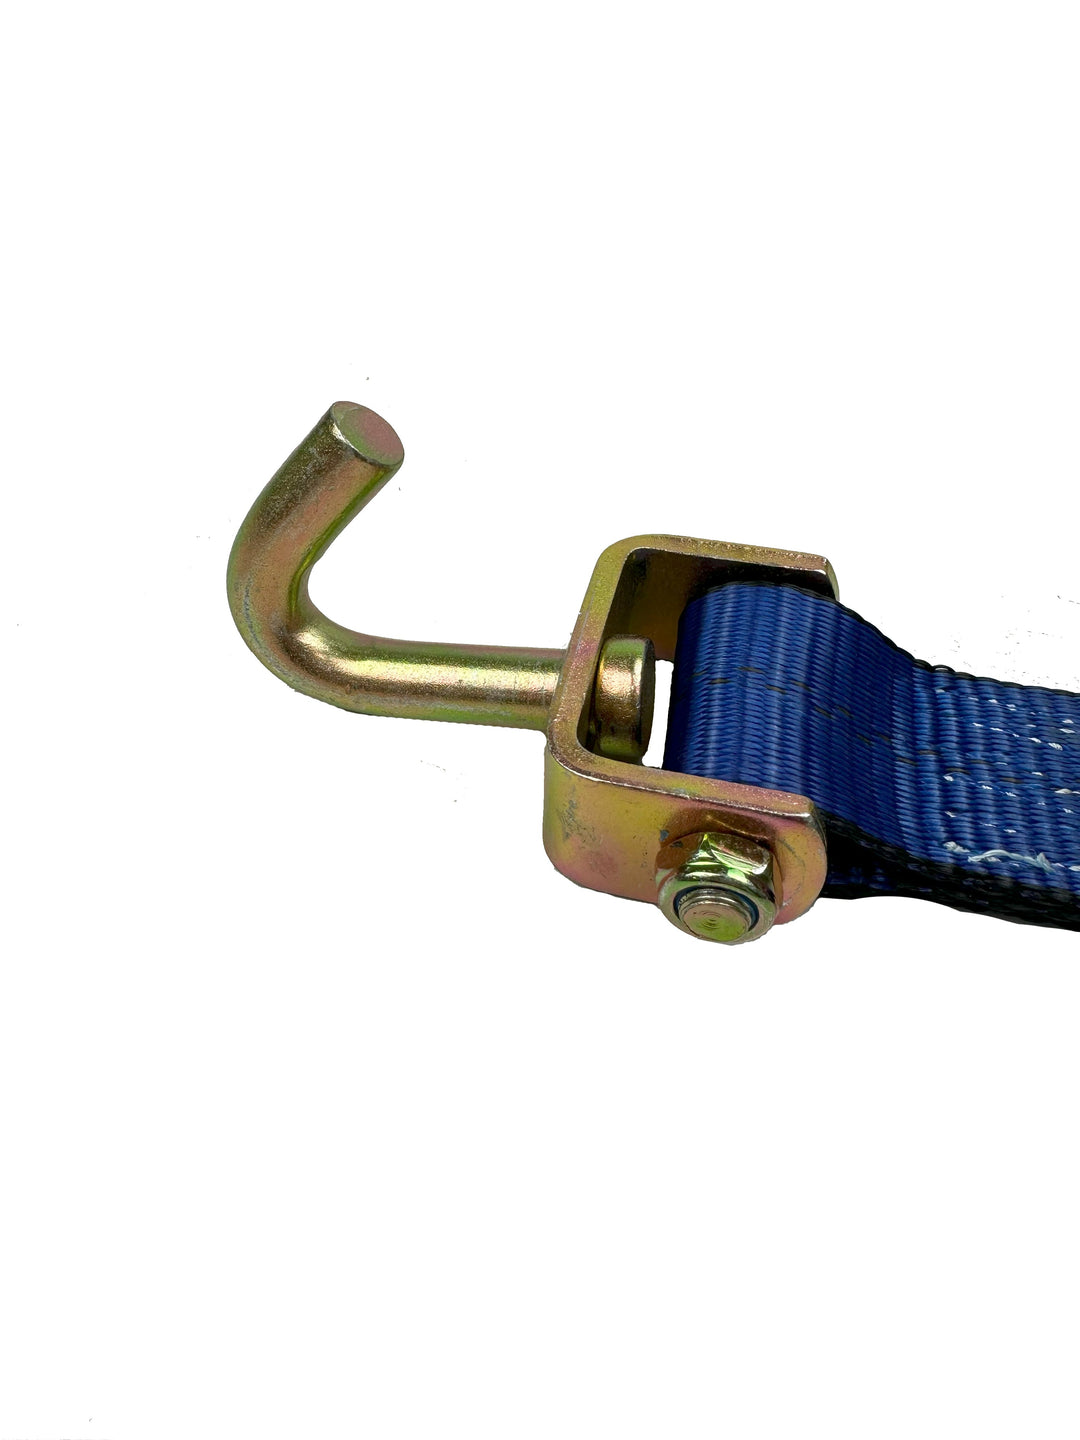 2'' Auto Tie Down Ratchet Strap with Swivel J Hook - FIXED SIDE ONLY